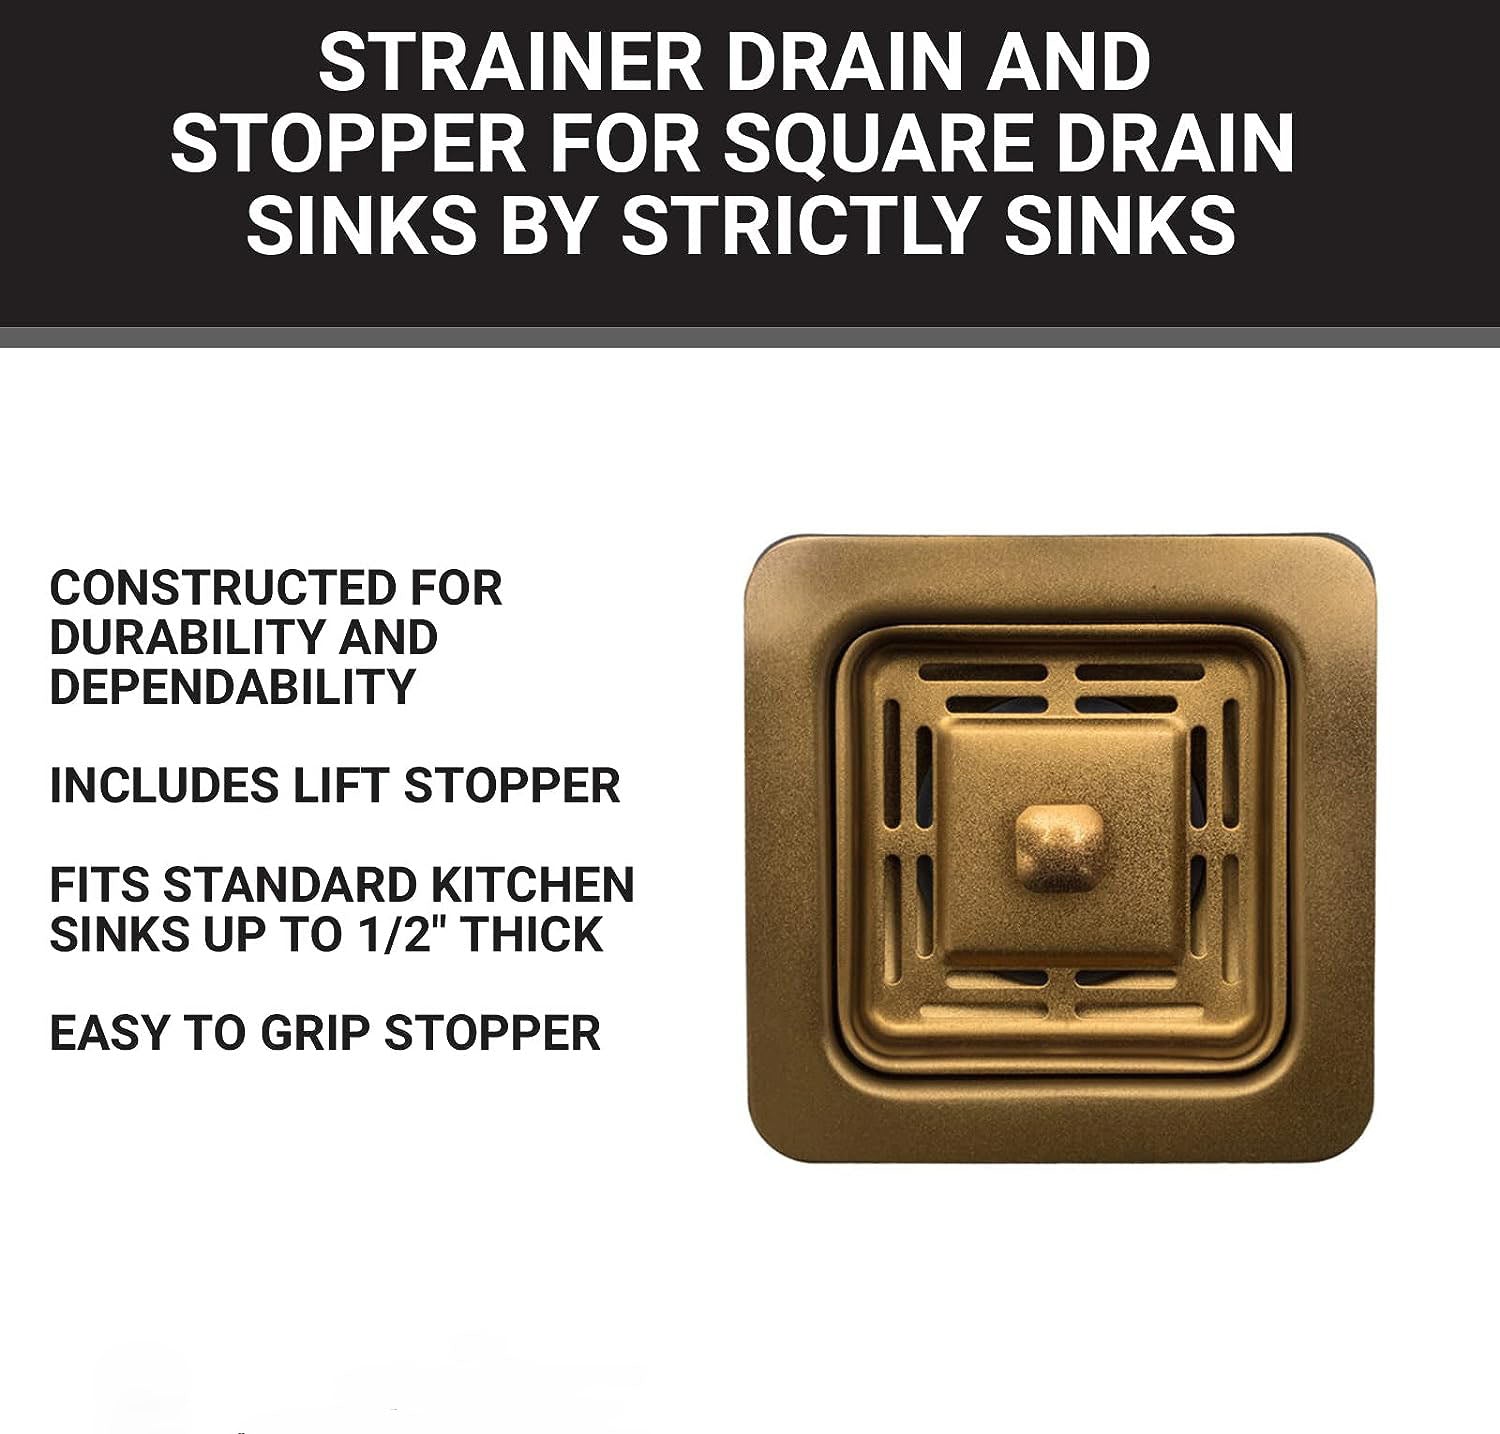 Sinks Stainless Steel Sink Strainer for Kitchen Sink - Stain Resistant Kitchen Sink Strainer with Large Collection Basket,Sink Drain Strainer for All Square Drain Sinks (Gold) Fossa Home